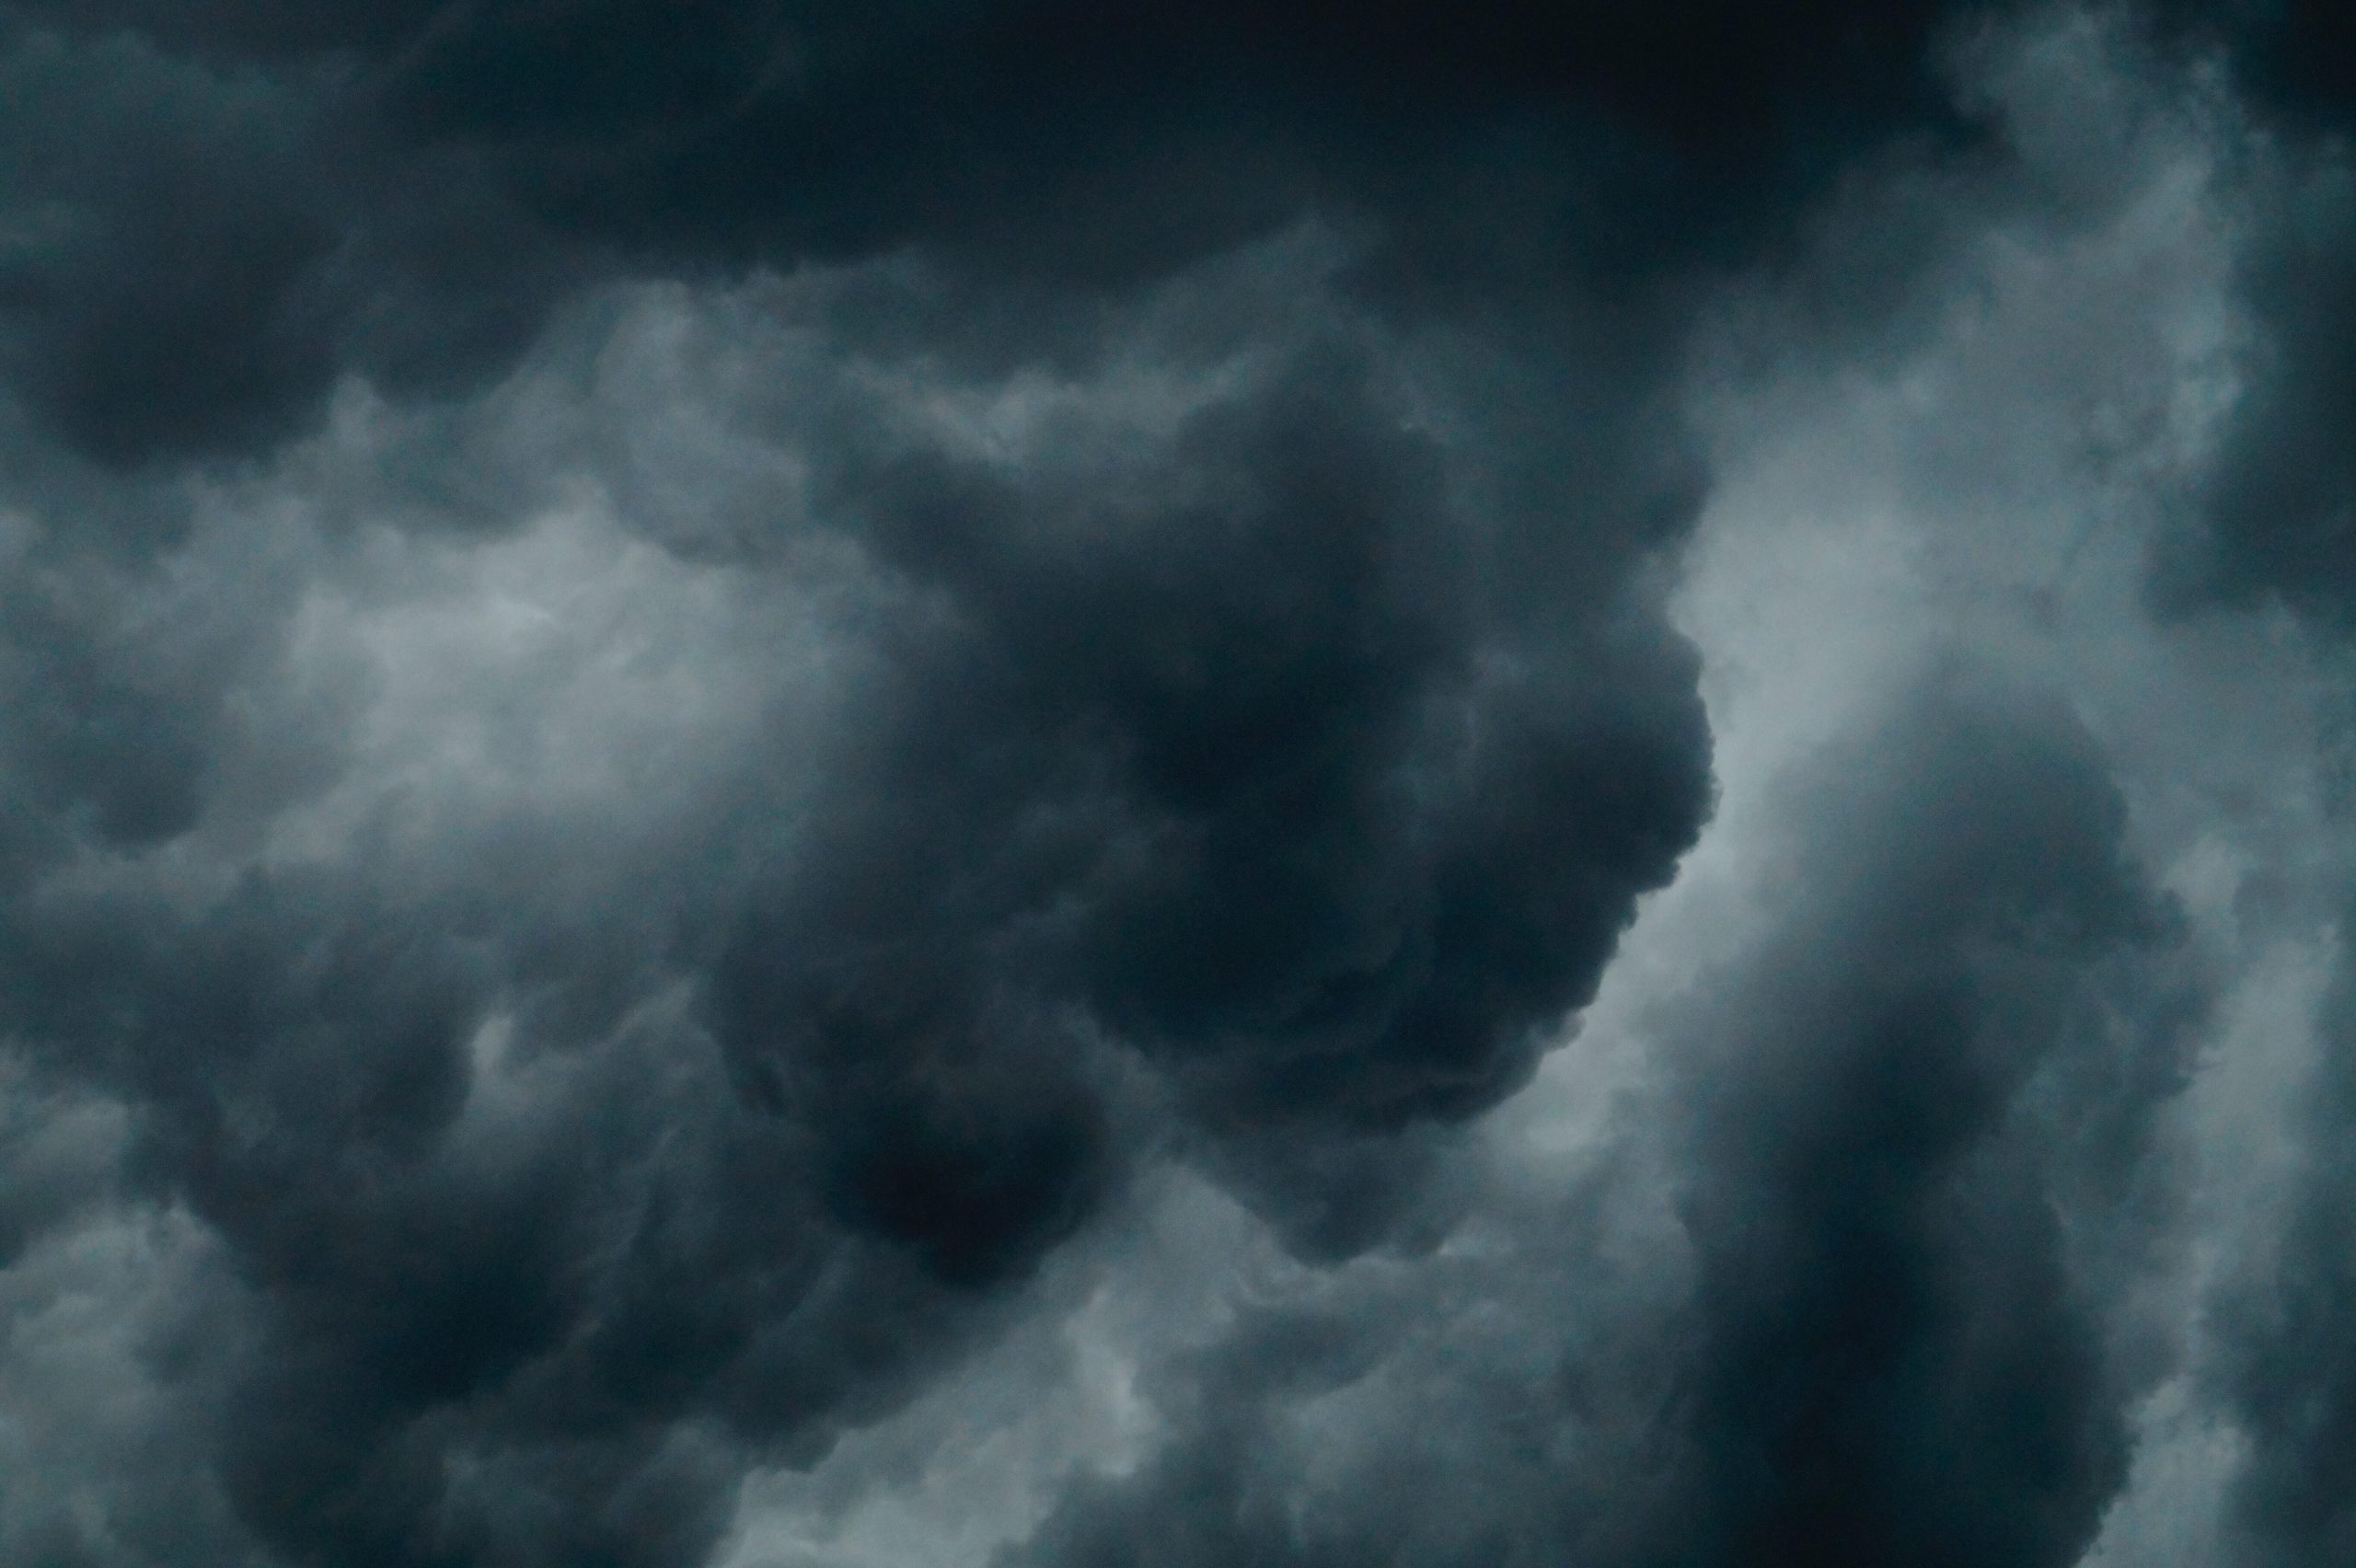 The image depicts swirling dark clouds in the sky with the suggestion of an upcoming or ongoing storm